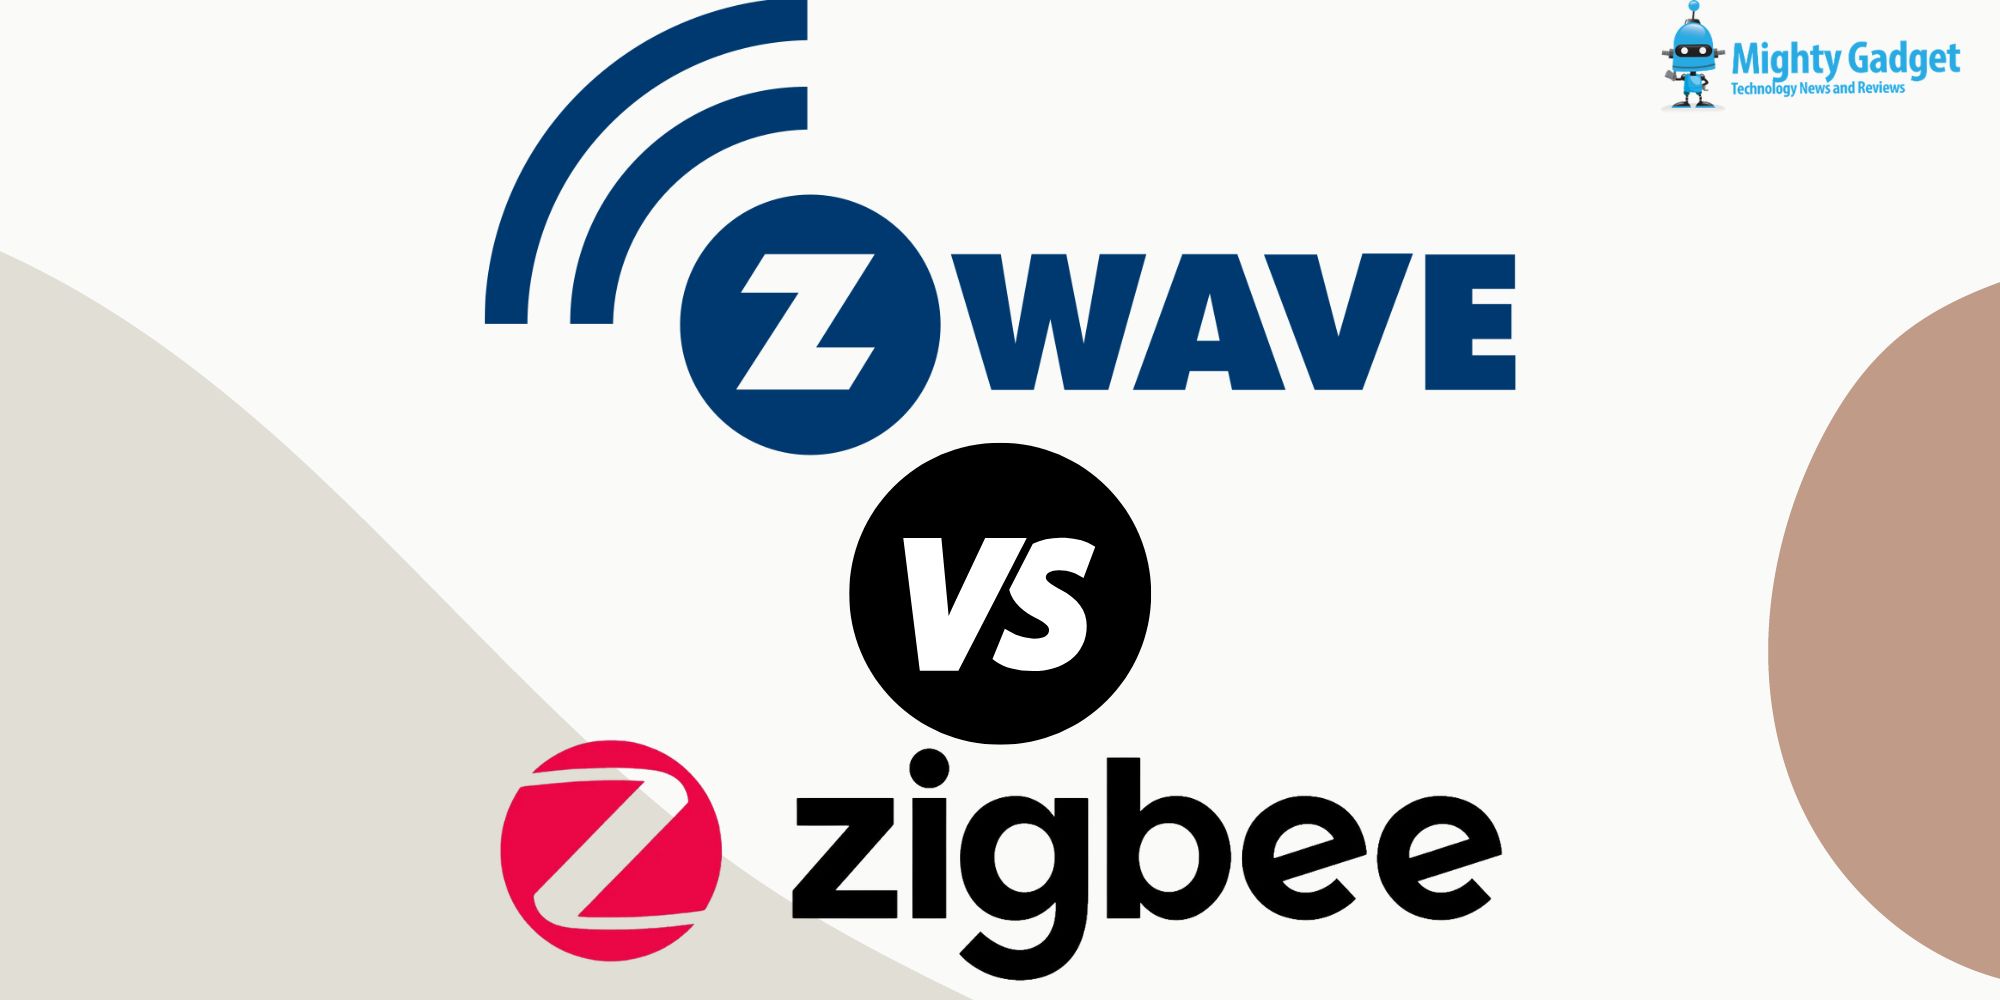 What are the differences between Z-Wave vs Zigbee – Pros & cons of each standard